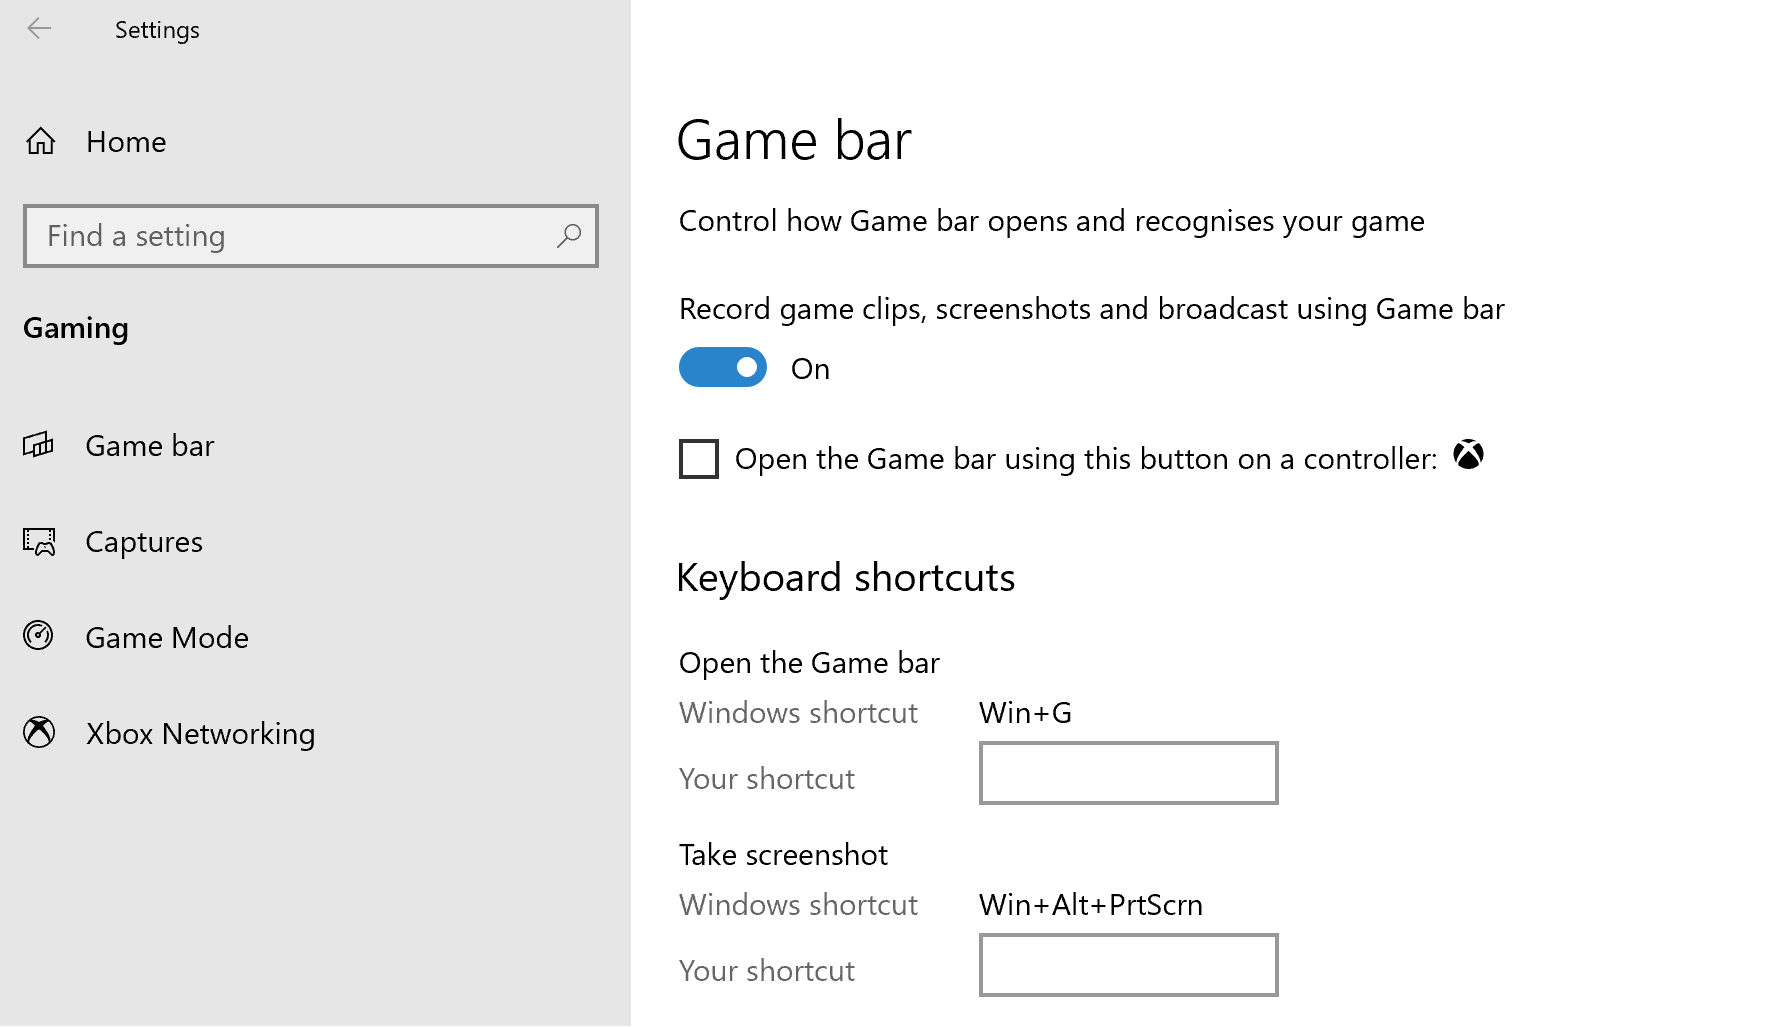 Toggle on the broadcast option in the Windows 10 Game Bar to broadcast via Mixer